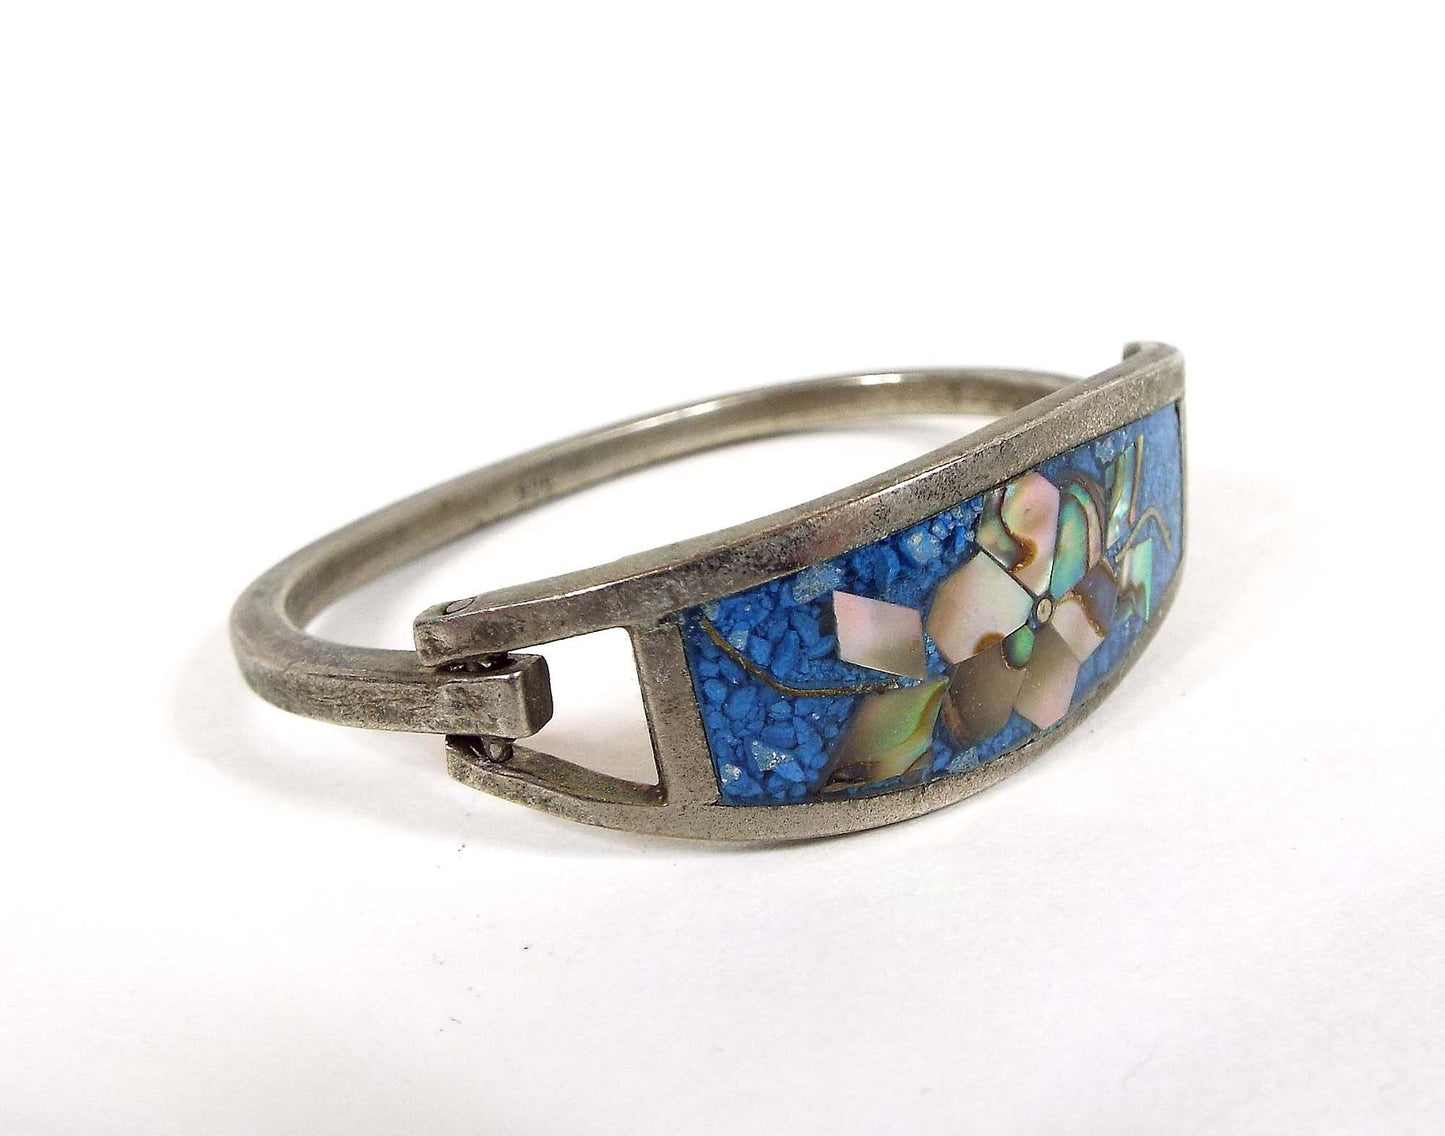 Very Small Vintage Blue Hinged Bangle Bracelet with Stone Chips and Inlaid Abalone